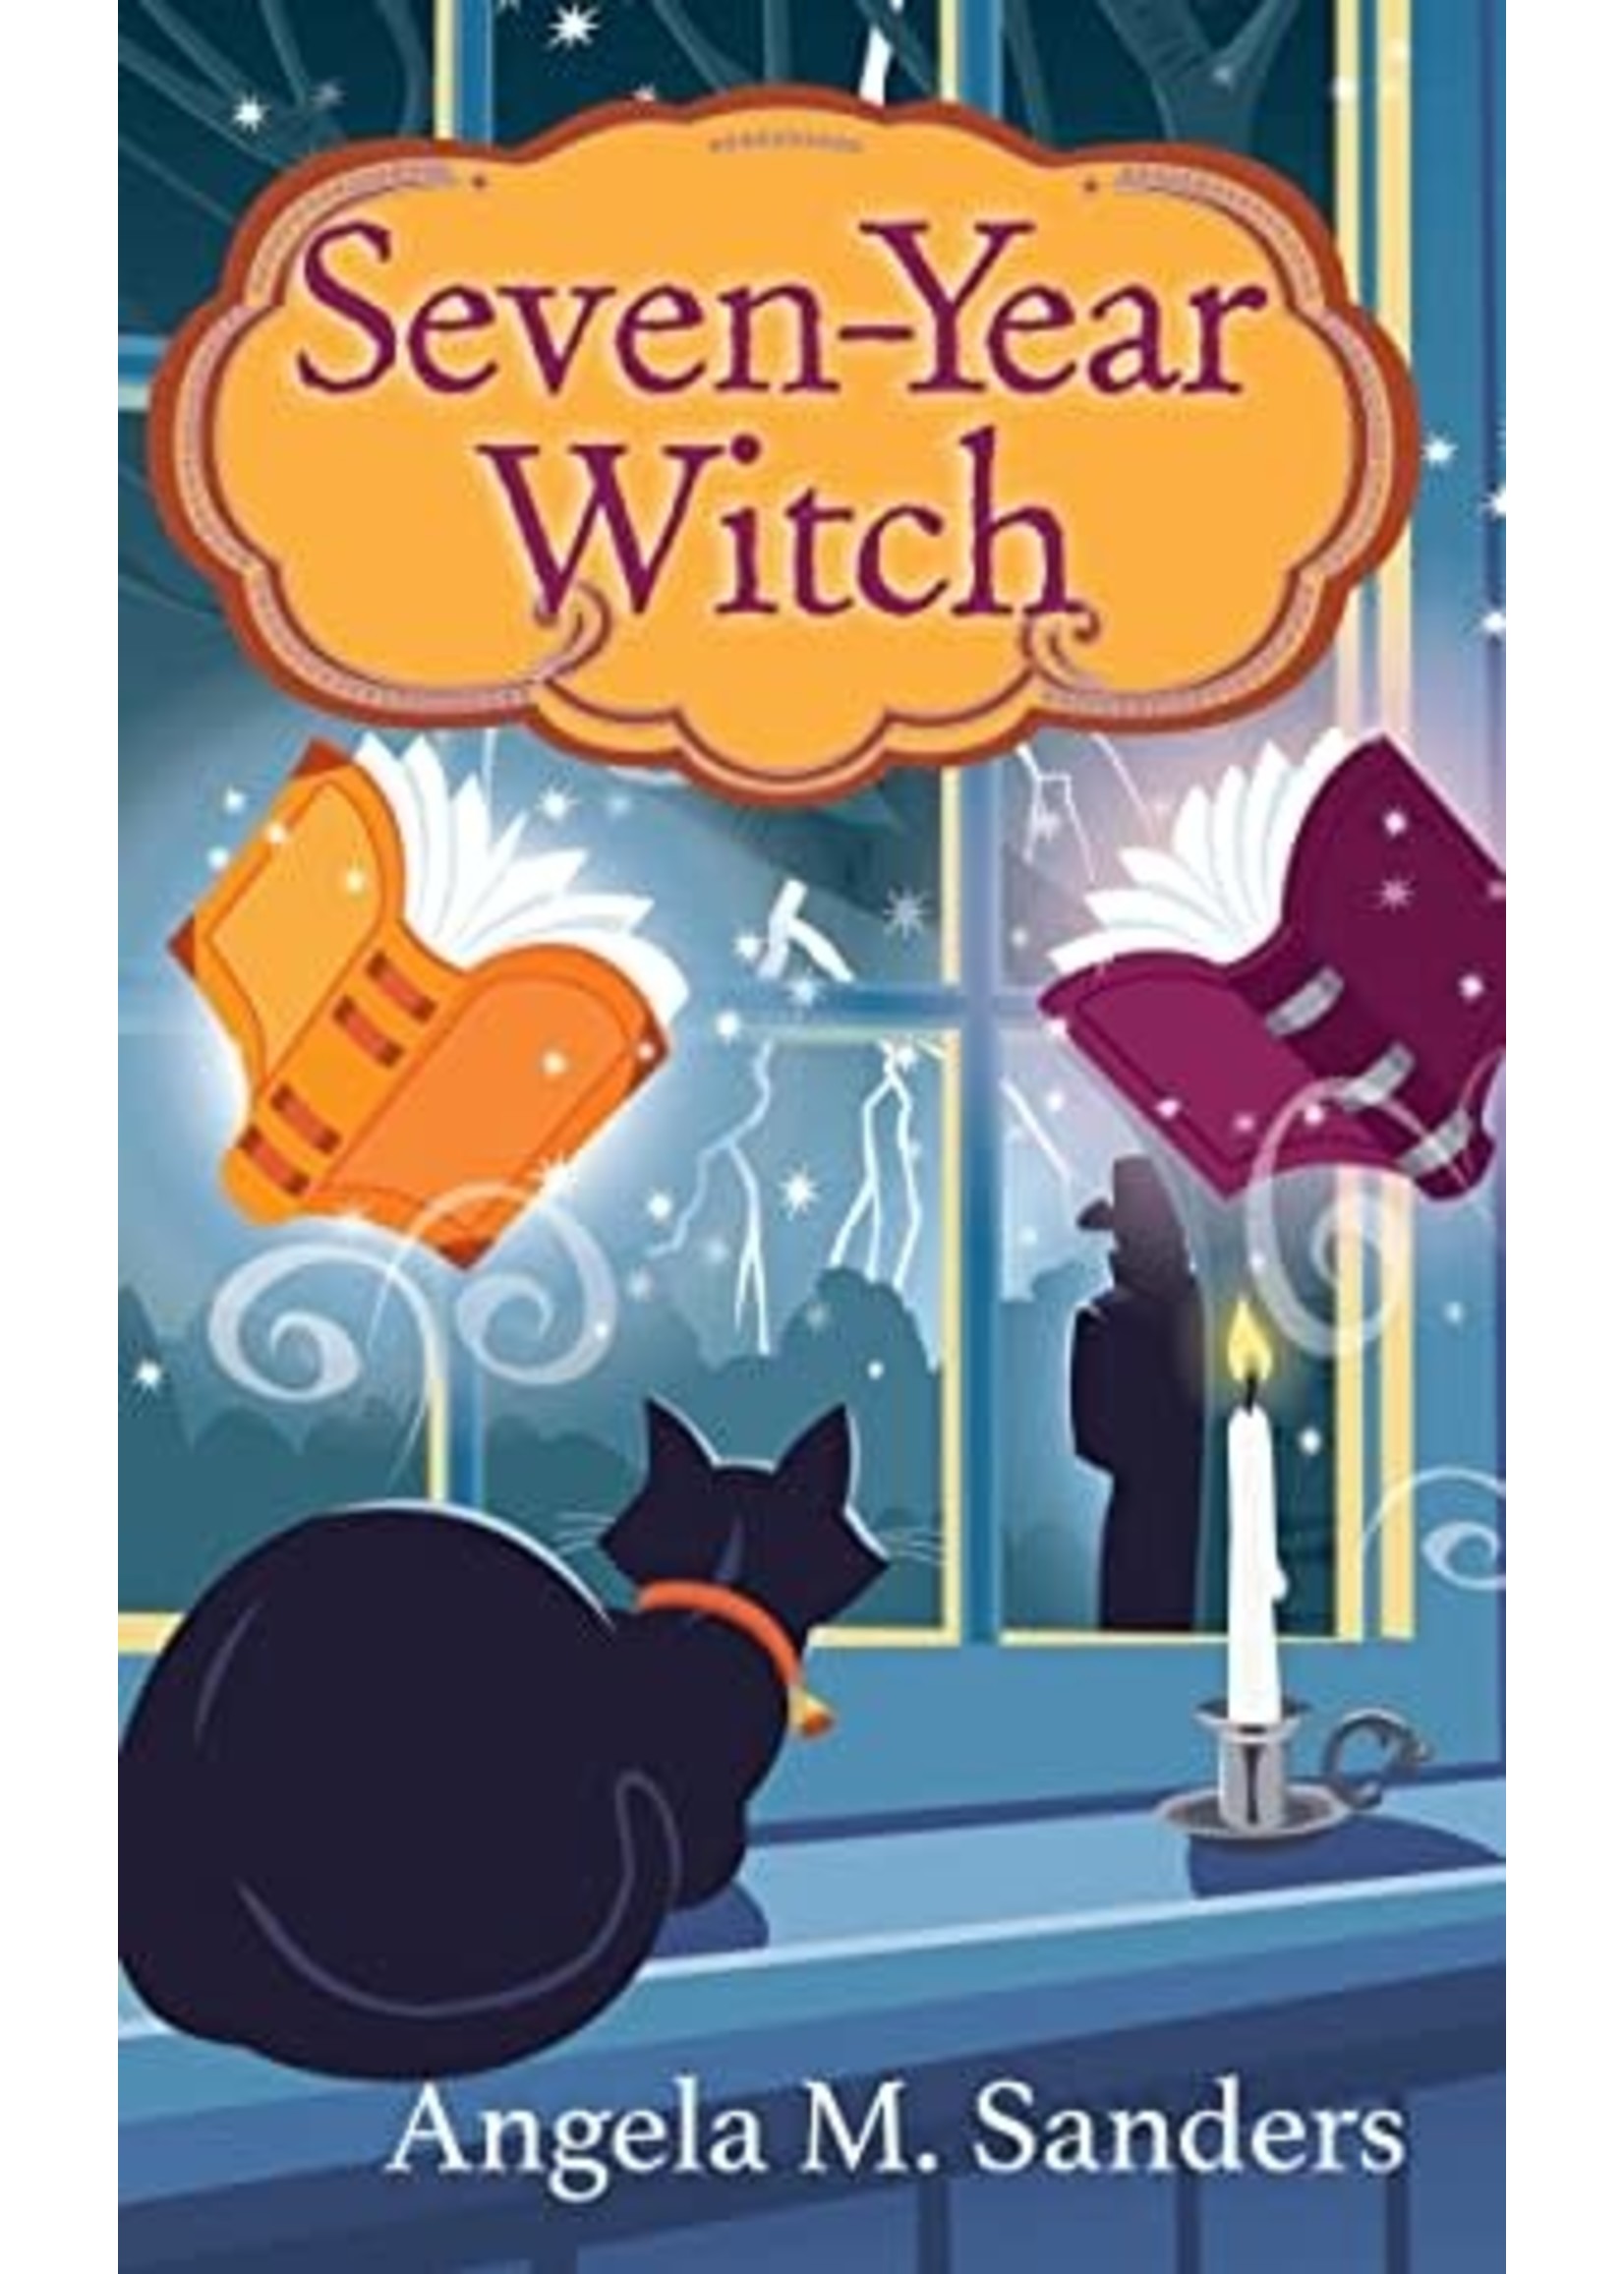 Seven-Year Witch (Witch Way Librarian Mysteries #2) by Angela M. Sanders